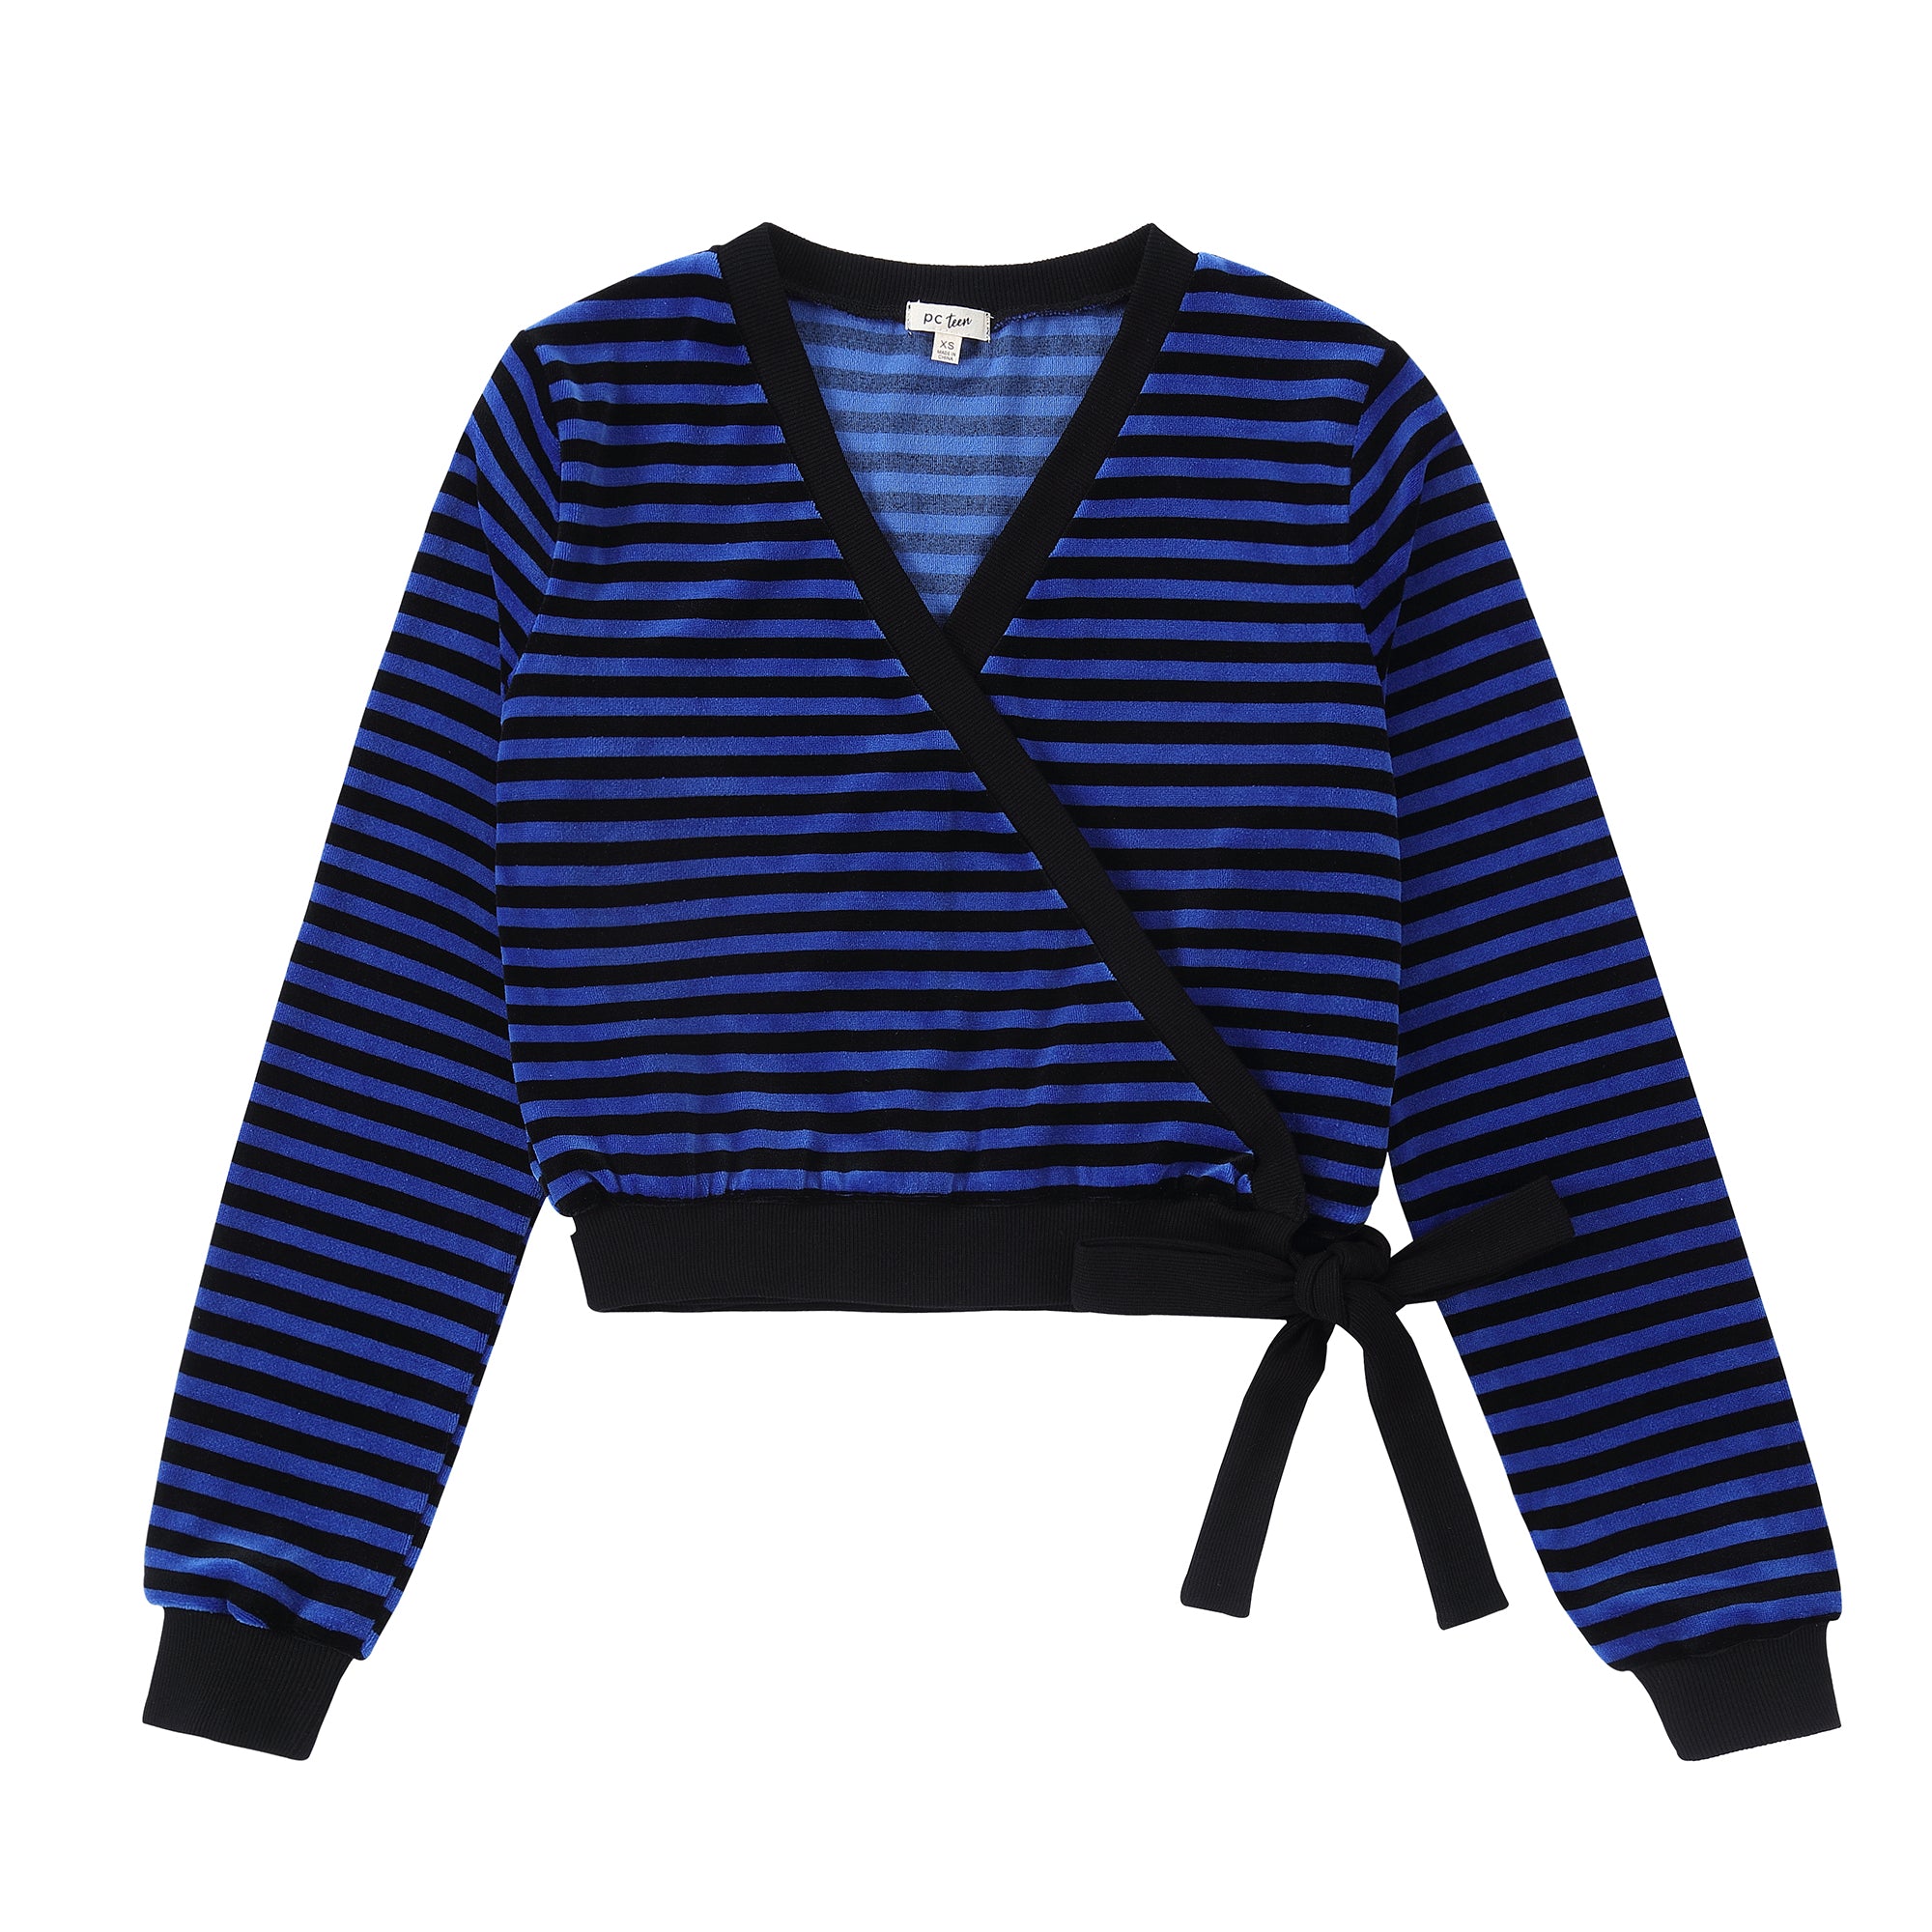 Royal Blue and Black Striped Velour Wrap Top